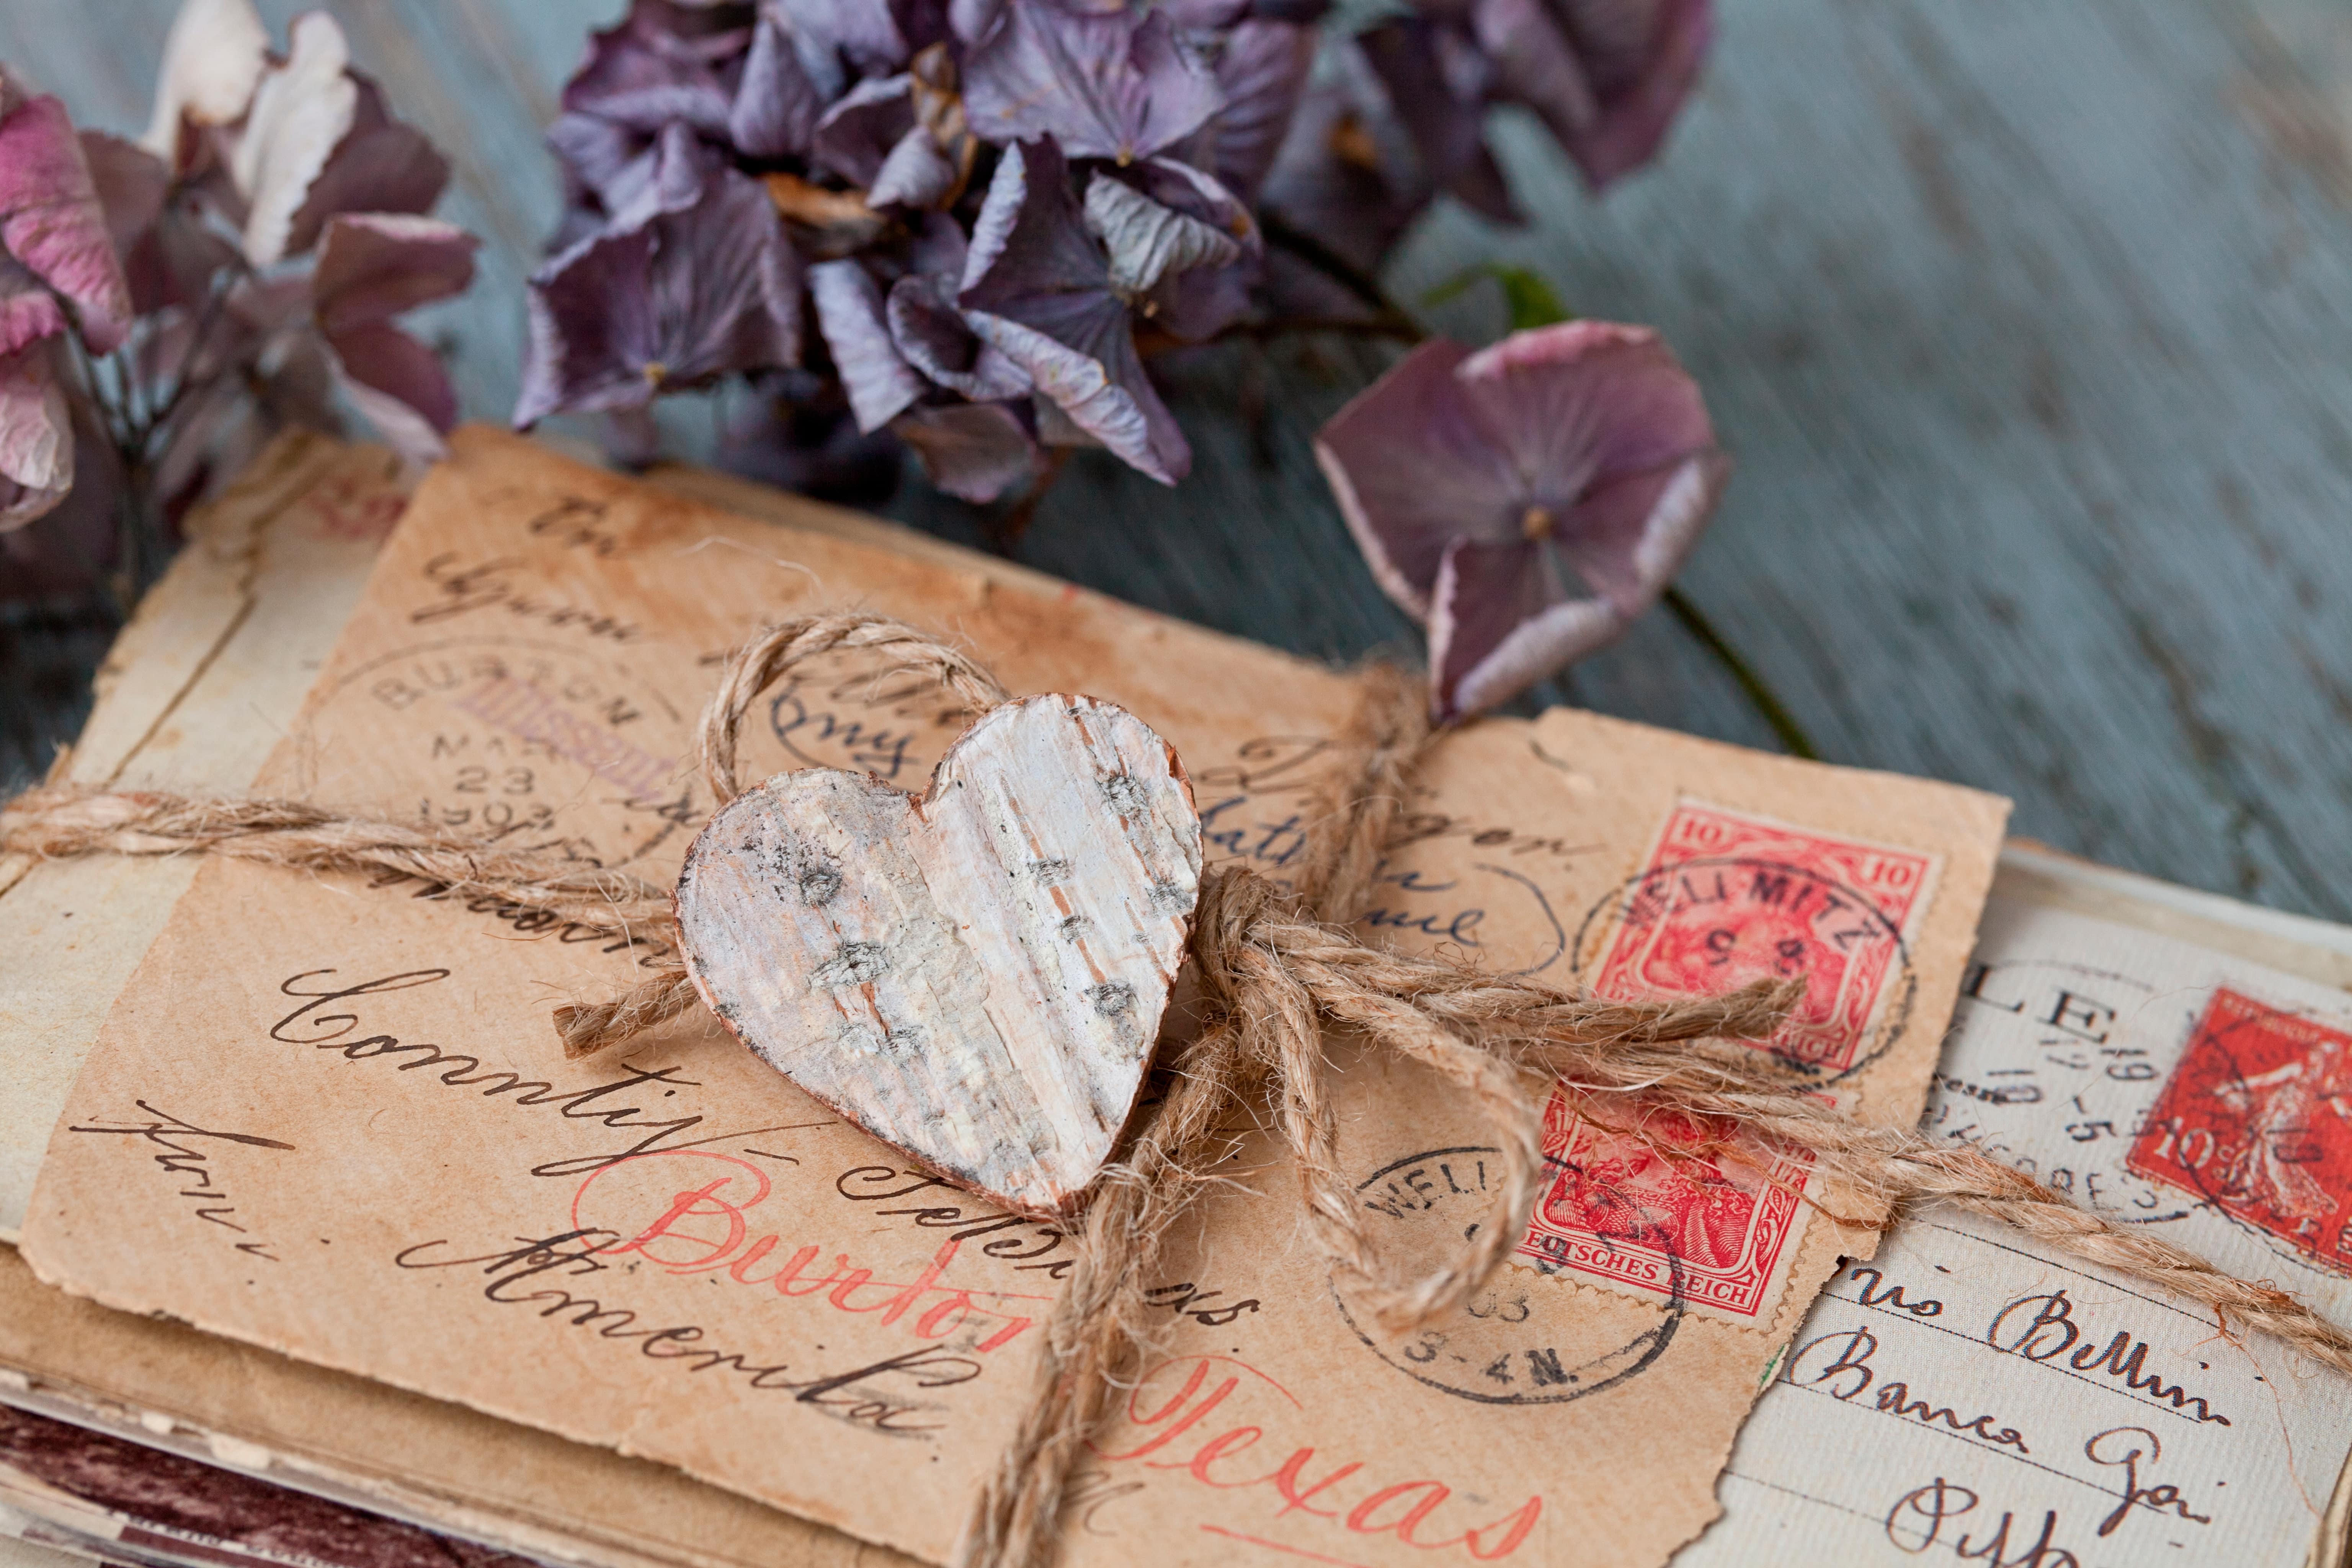 A bundle of old letters tied with string and a wooden heart on top. posies of hydrangeas lie next to the ltters.